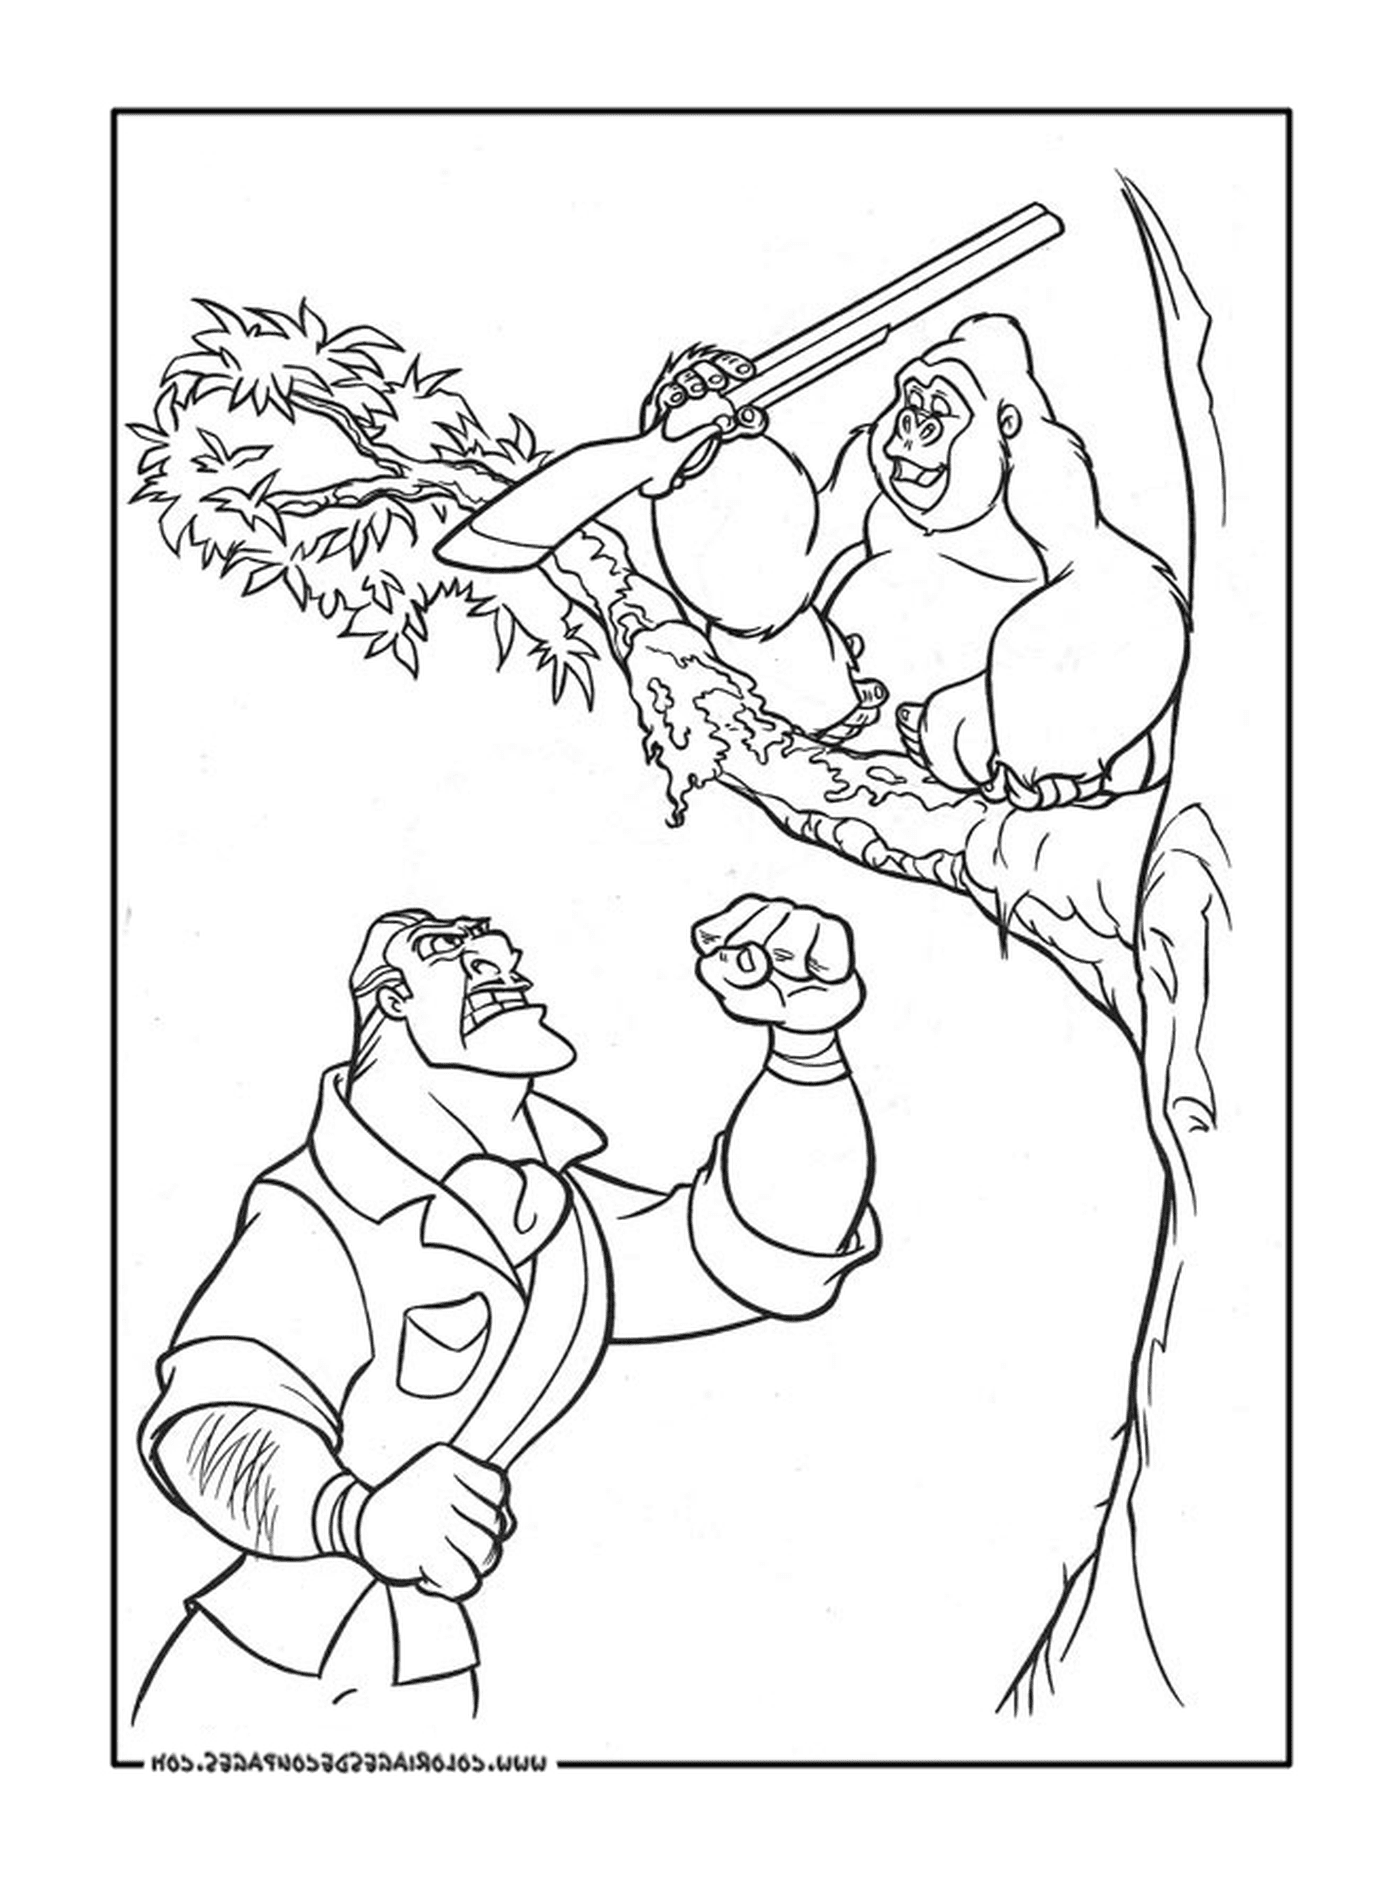  Man and gorilla in a tree 